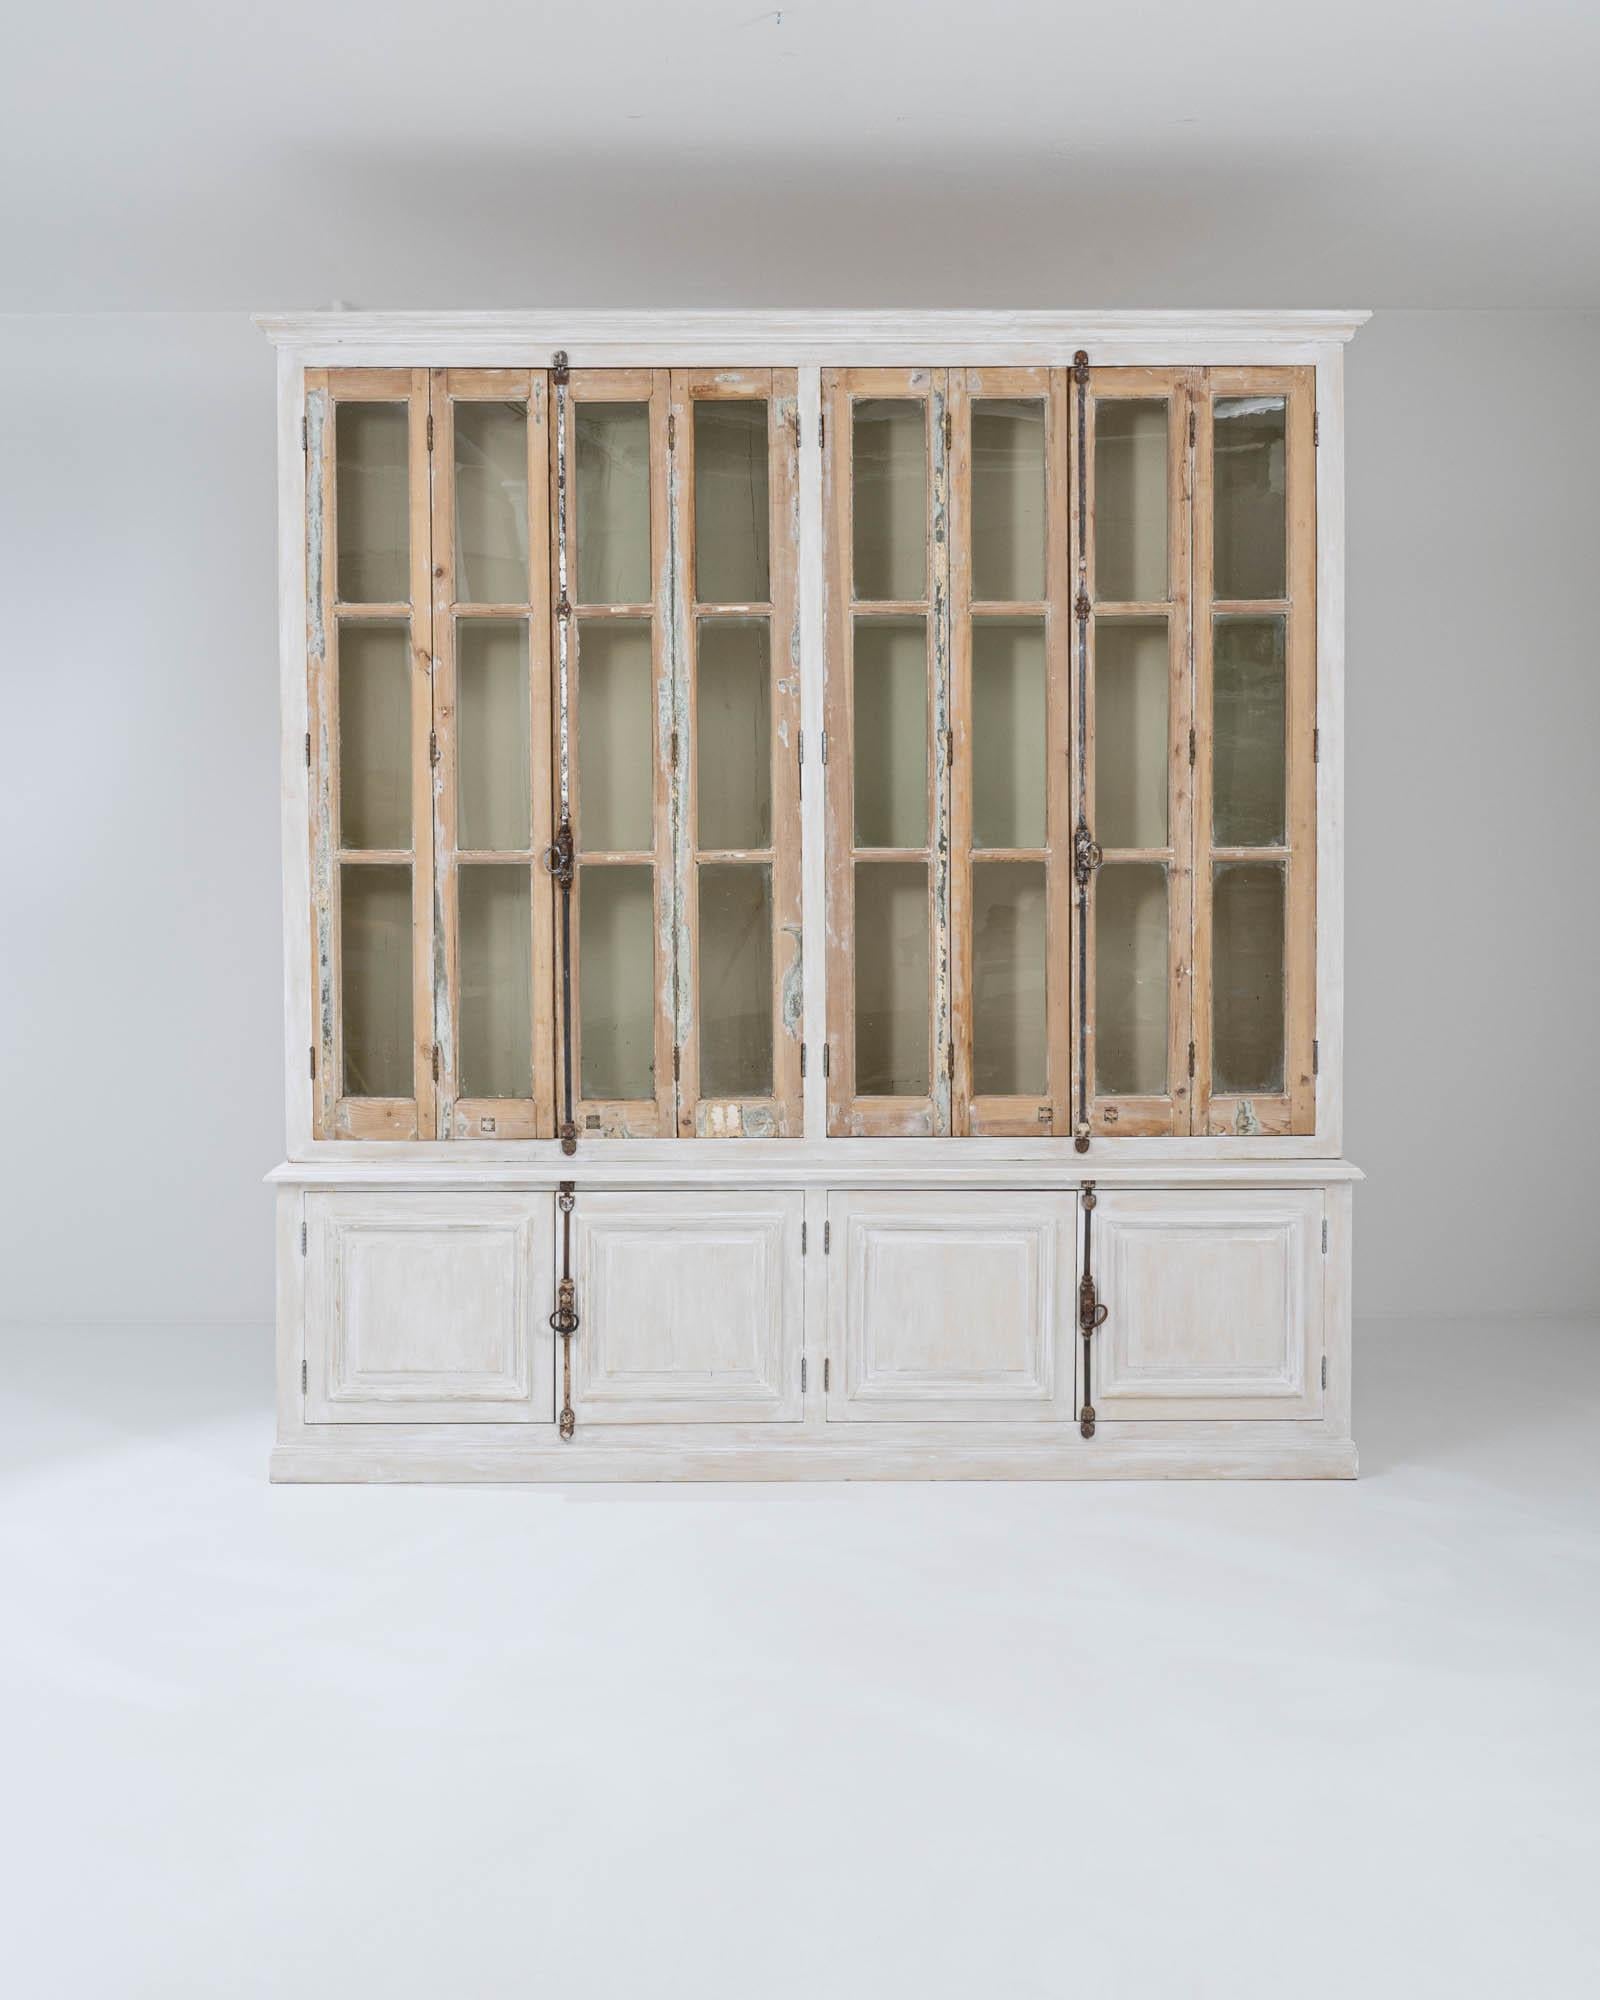 An interplay of patinas gives this vintage wooden vitrine a unique and intriguing personality. Made in Northern Africa, the handsome cabinet with its carved cornice and deep paneling is painted a shade of clean white, muted and faded by a patinated